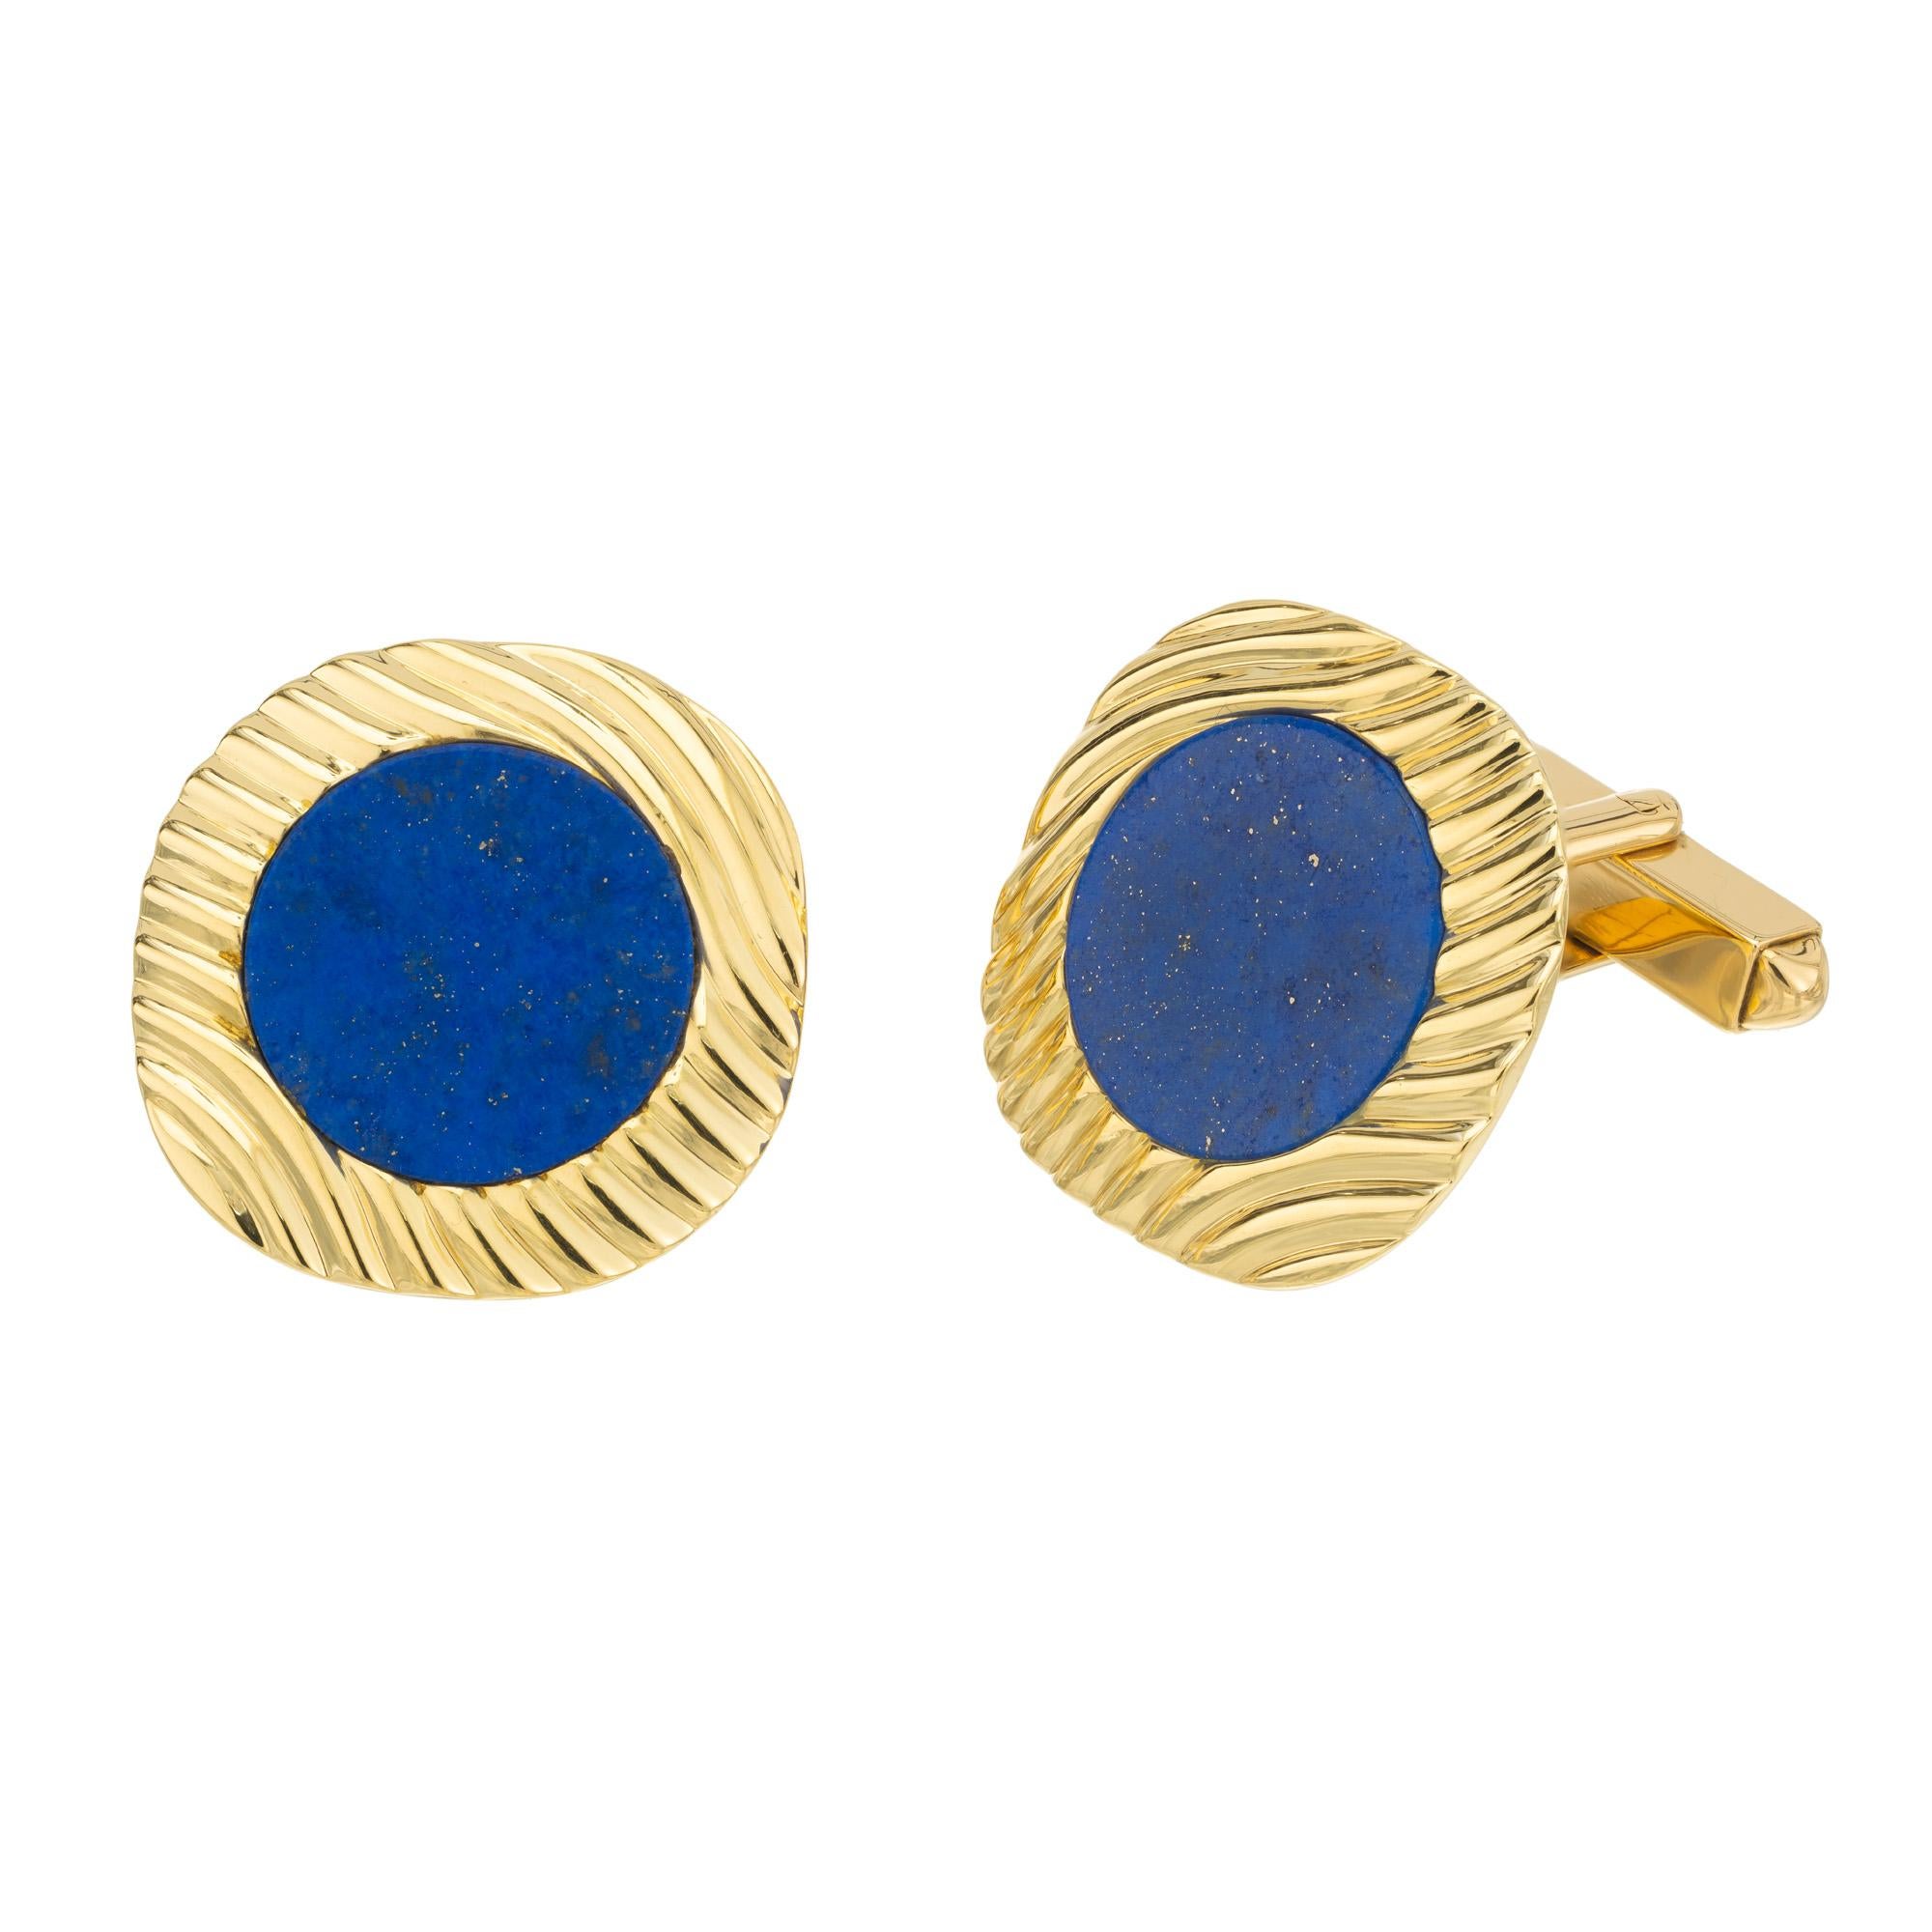 GIA Certified lapis lazulli men's cufflinks. 2 round lapis tablets set in 18k yellow gold men's cufflinks. Unknown designer. Certified by the GIA. The deep blue hue of the lapis lazuli stones, known for their celestial charm, beautifully contrasts